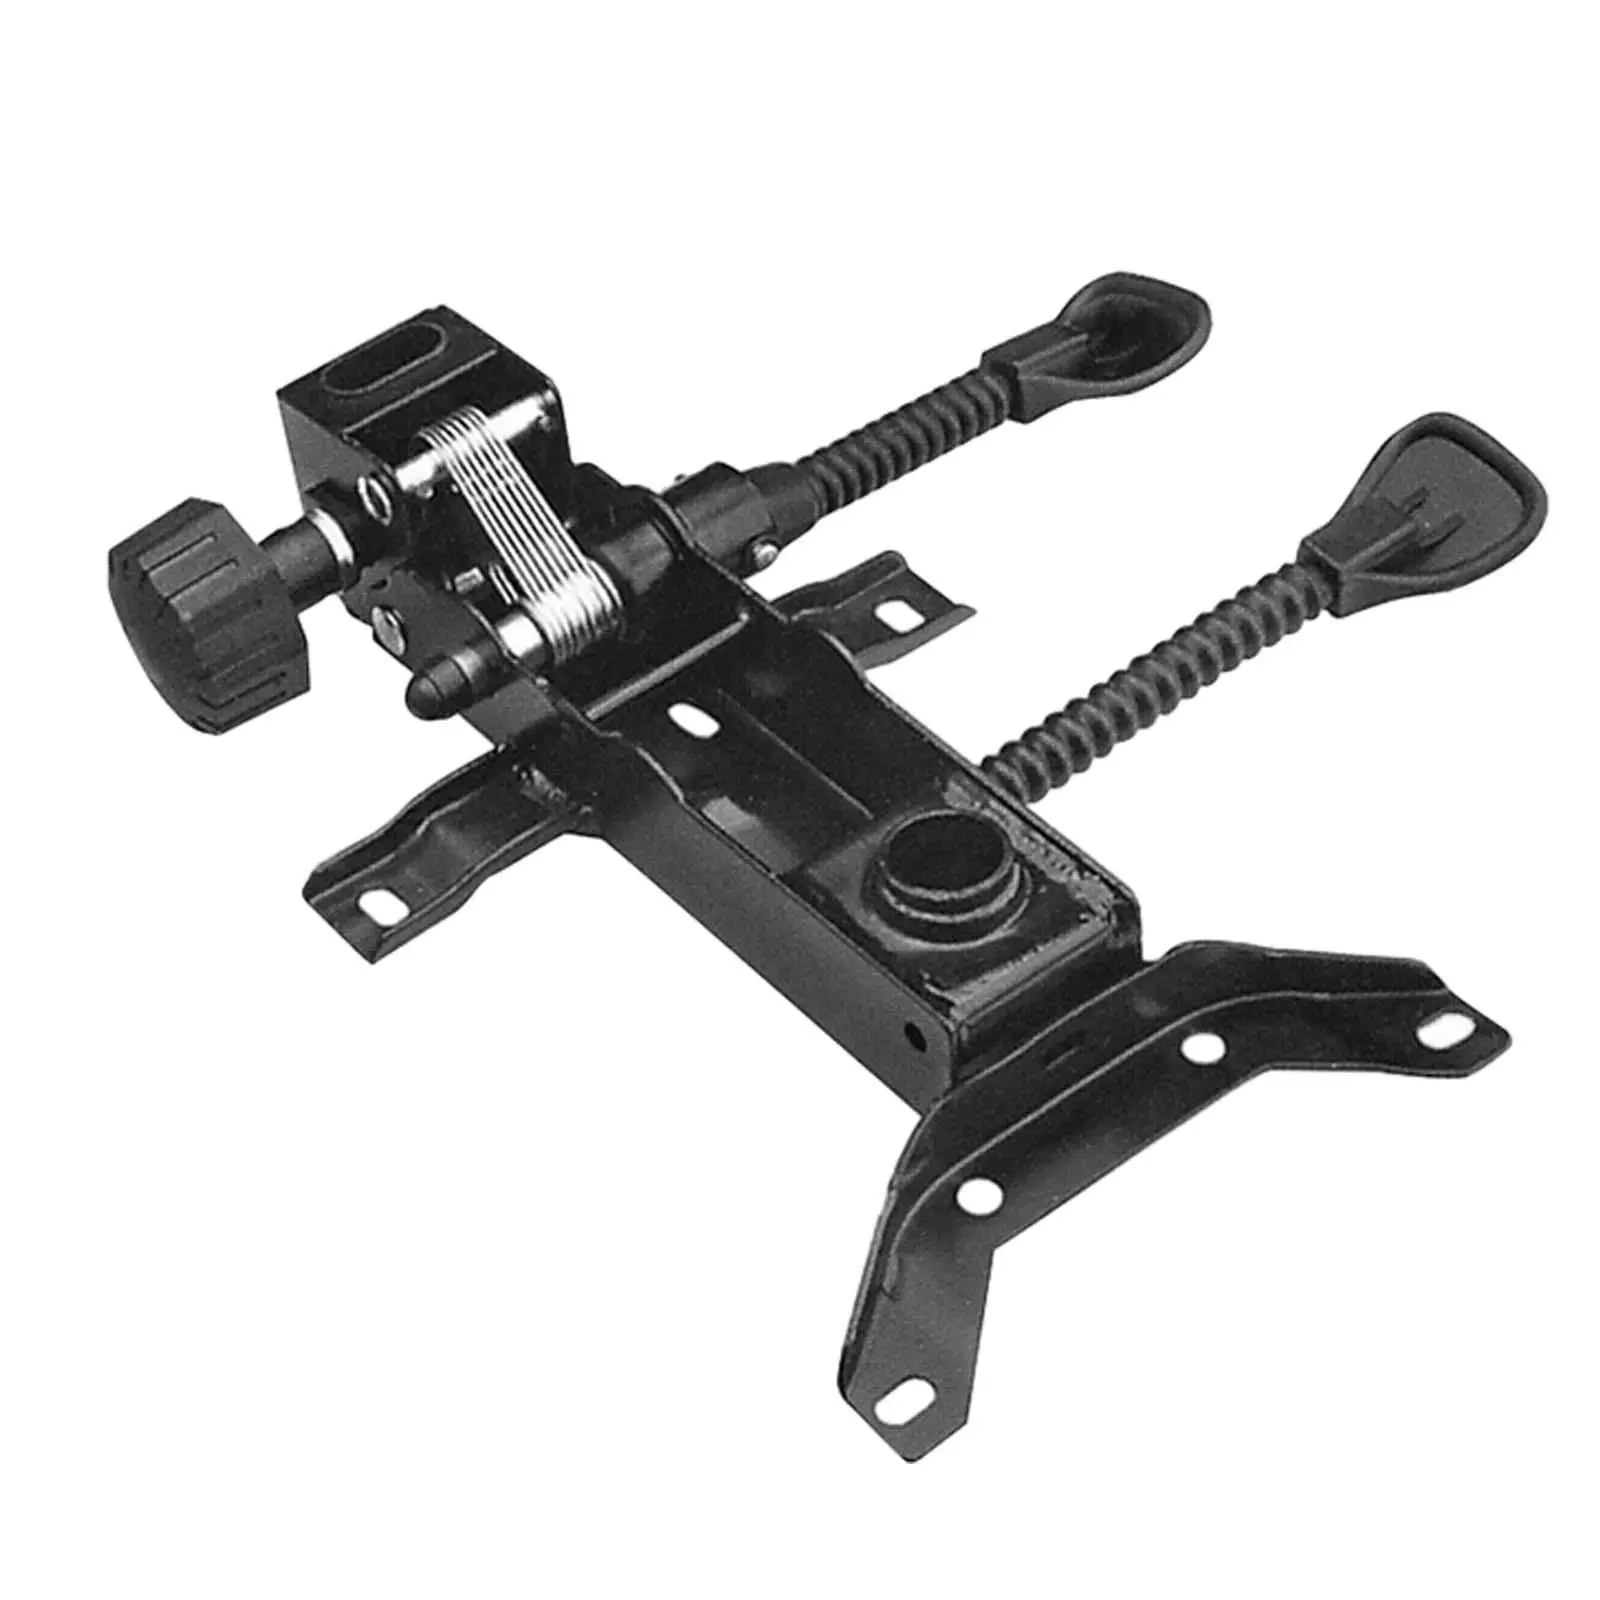 Office Chair Base Replacement Rotating Tray Office Chair Tilt Control Mechanism for Mesh Chair Gaming Chairs Desk Chairs